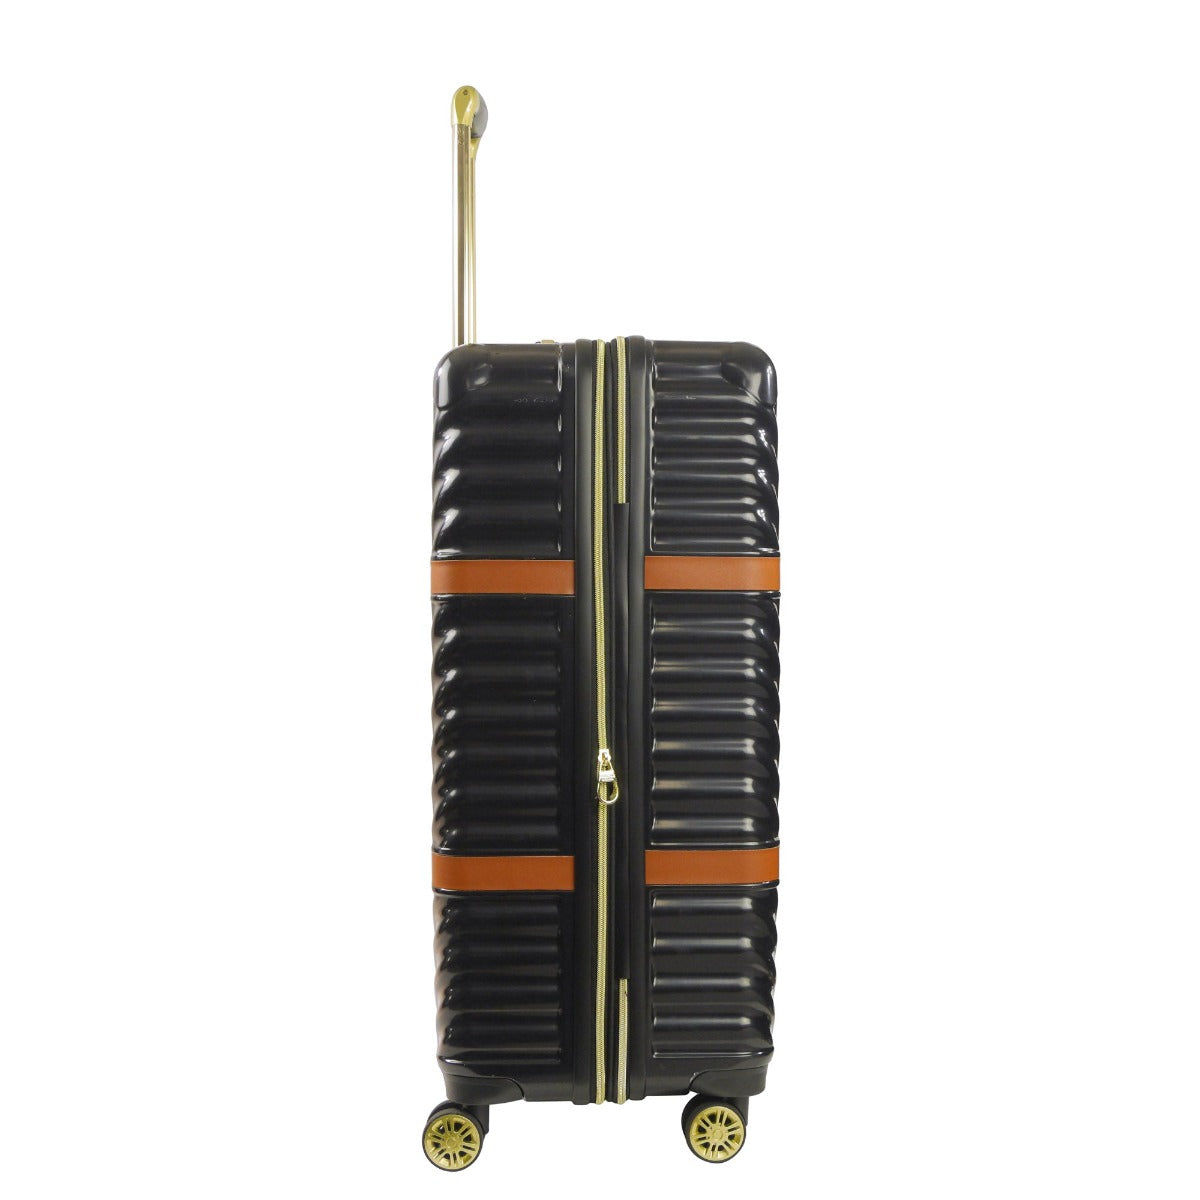 Christian Siriano New York Stella 29" black hardside spinner luggage - best checked suitcase for travelling